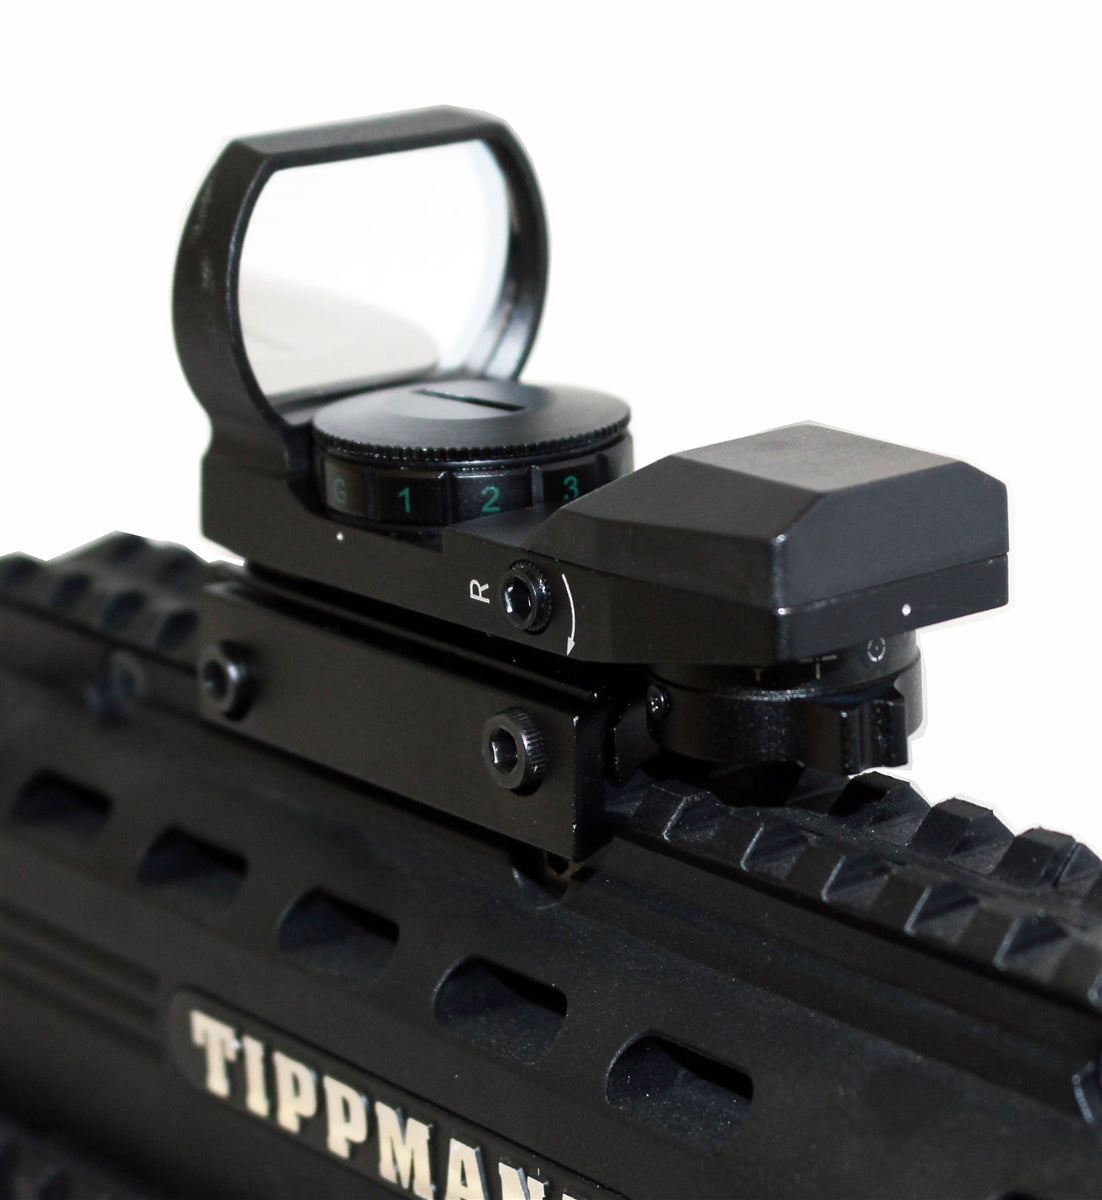 Trinity reflex sight with 4 reticles red green for tactical paintball guns.